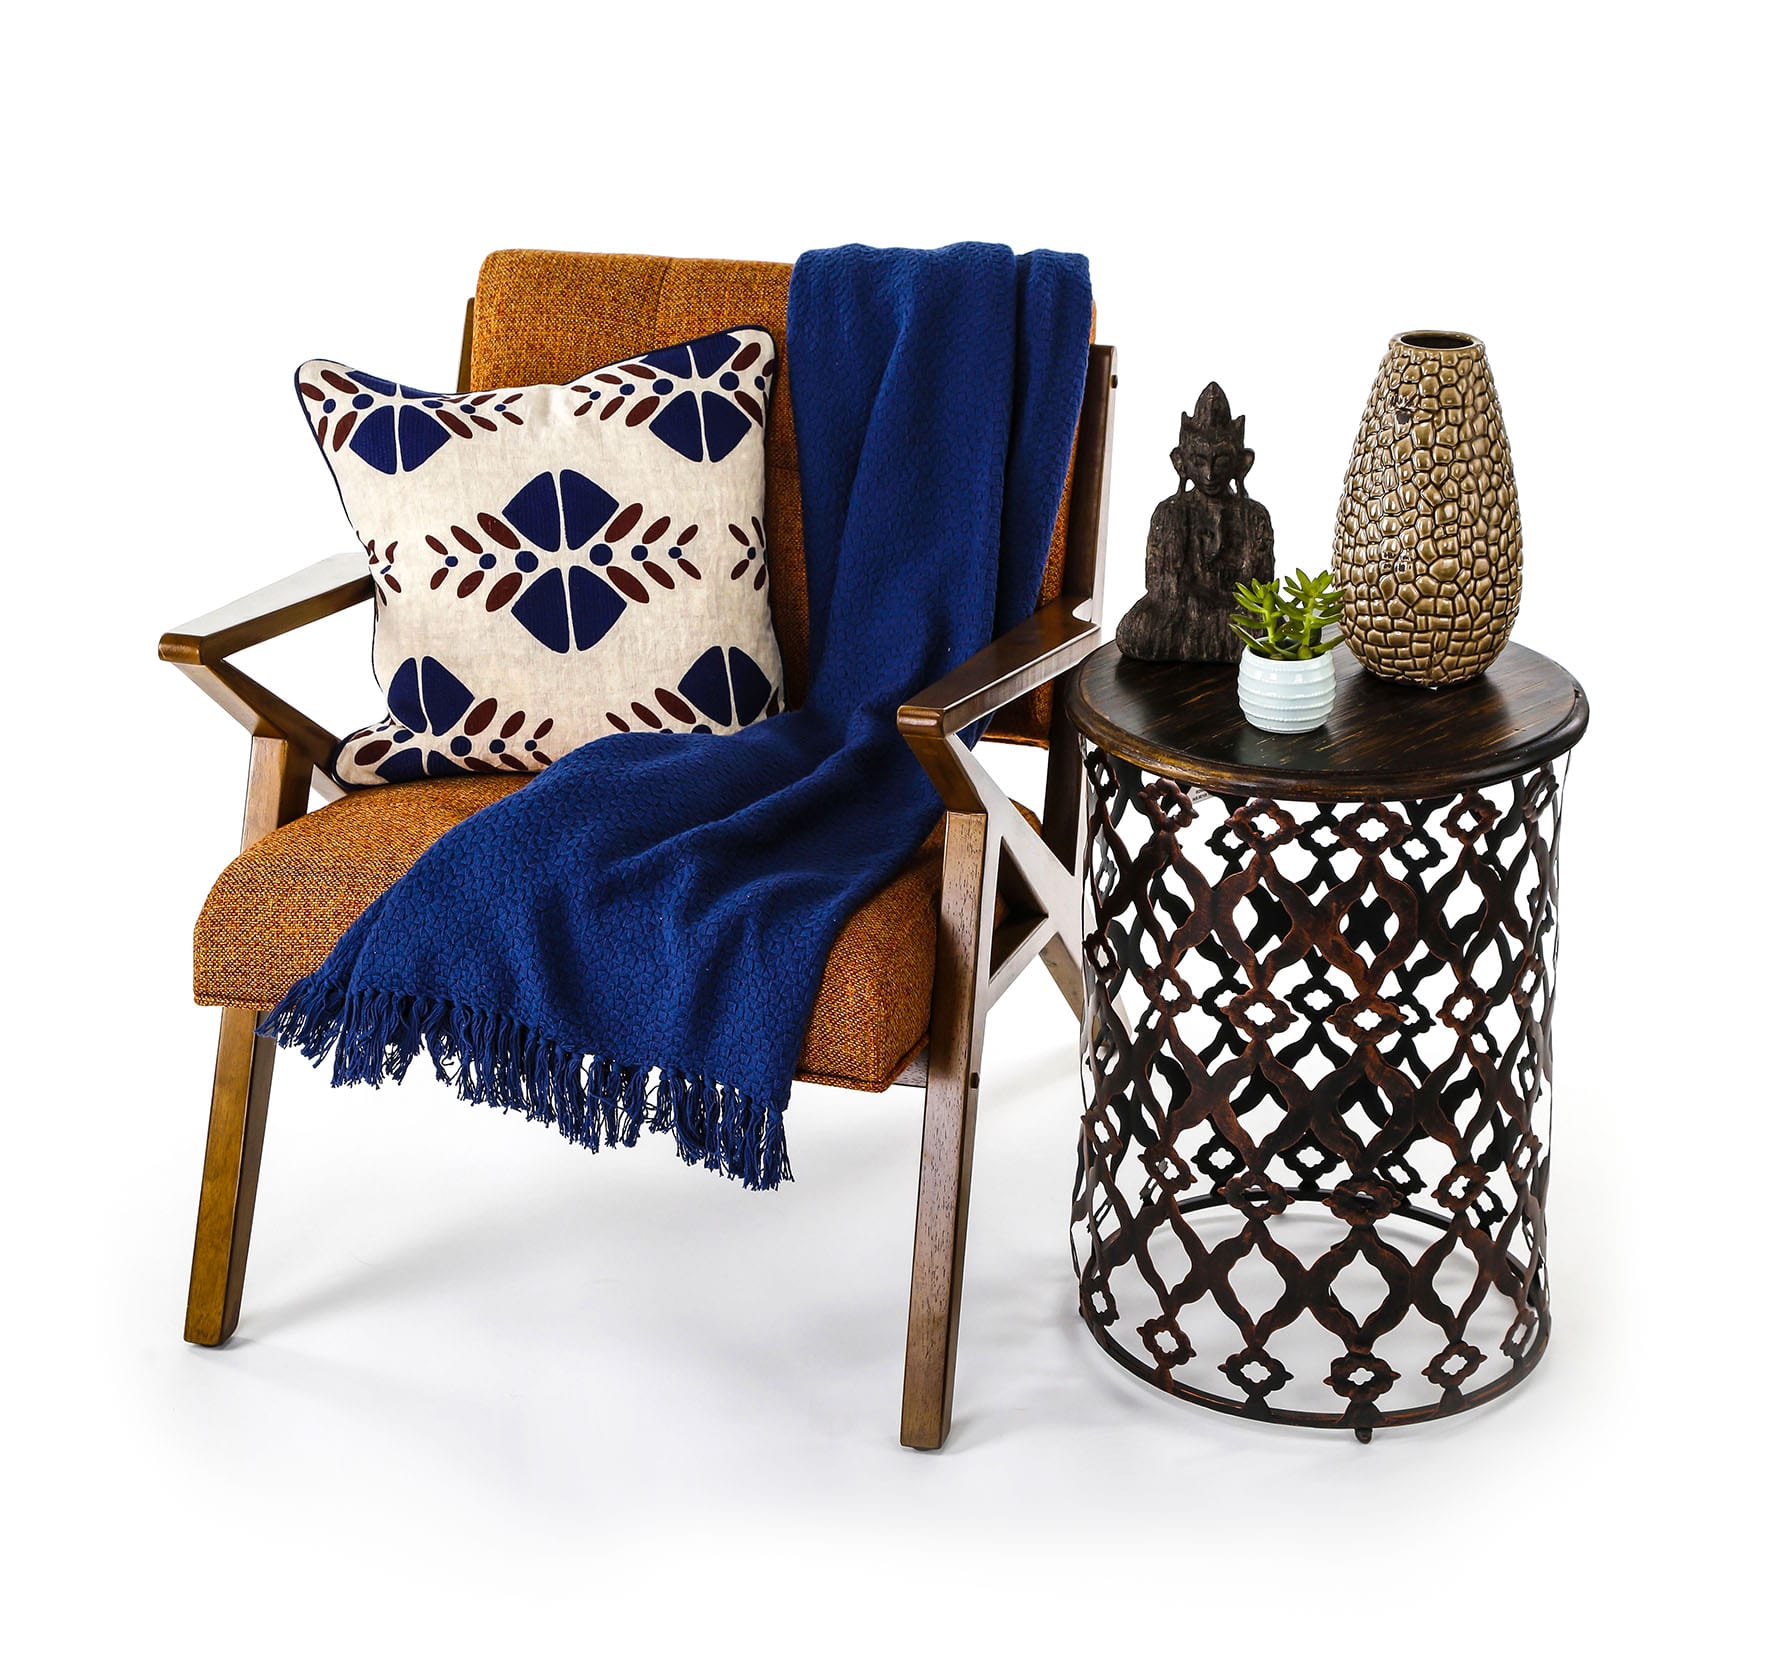 Home & Decor product photography - Chair and Sidetable Example